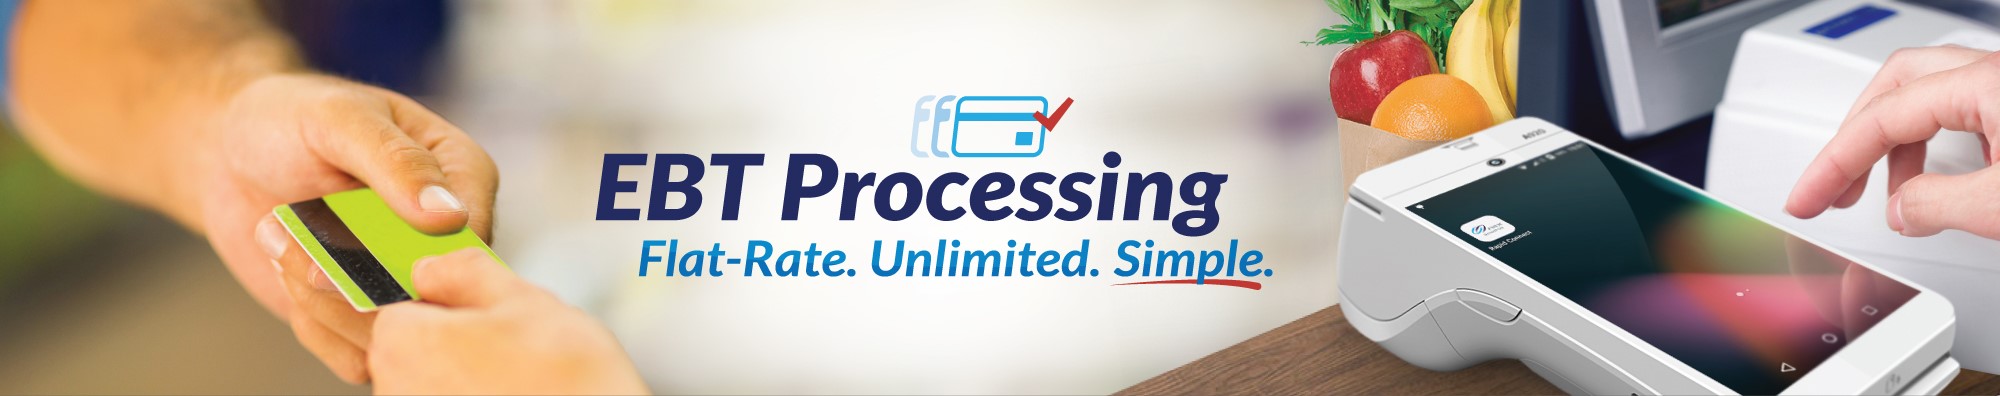 EBT SNAP Processing | Flat rate. Unlimited. Mobile payments.